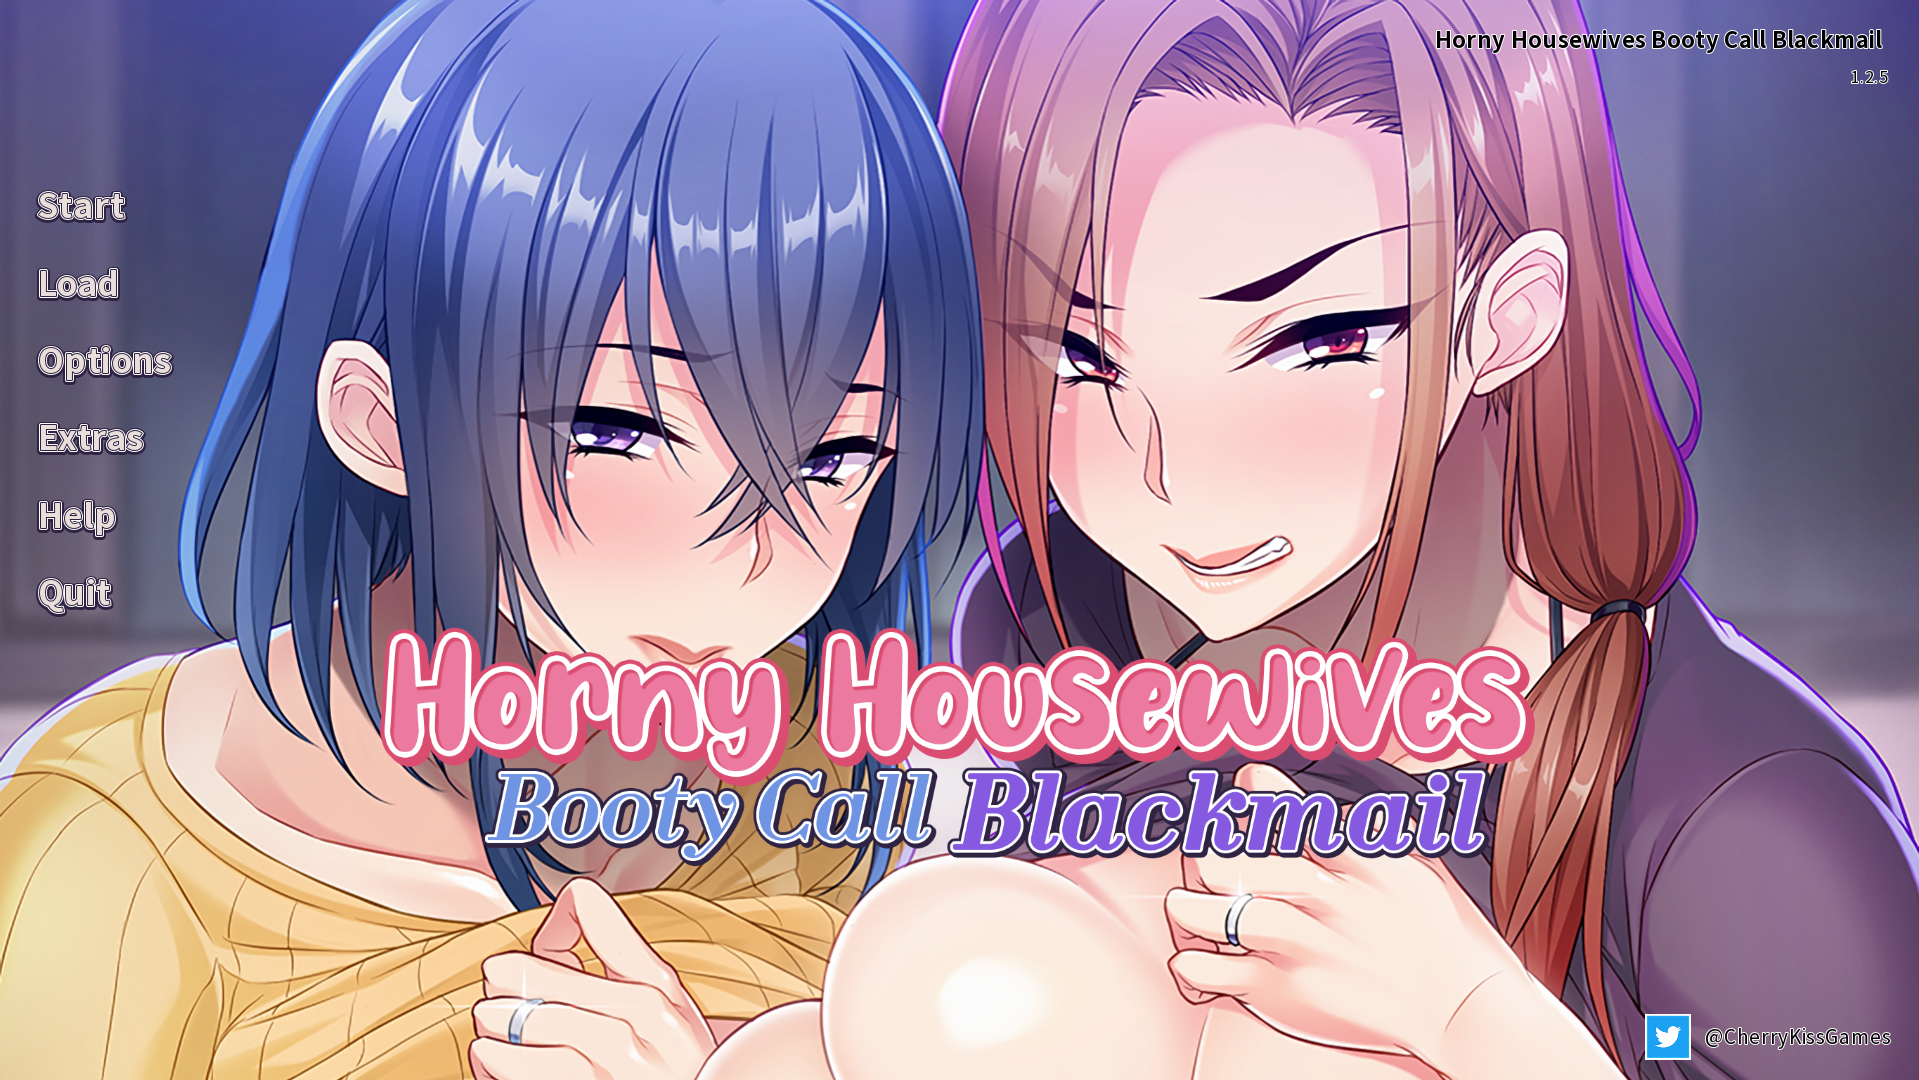 Horny Housewives Booty Call Blackmail COMPLETED - free game download, reviews, mega picture